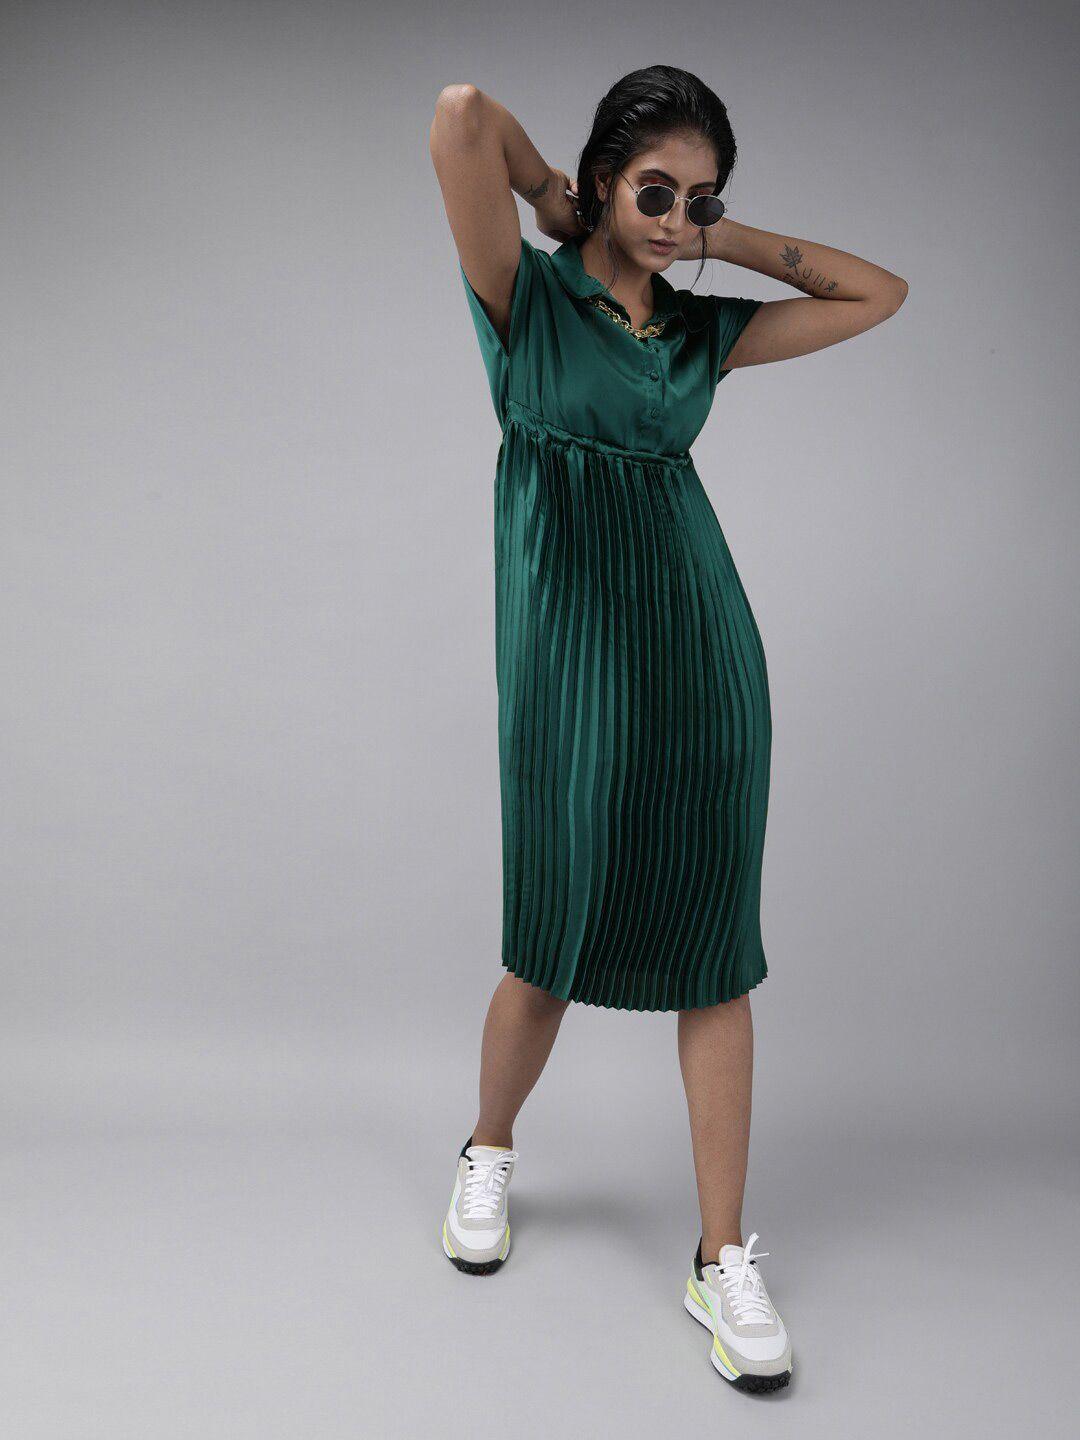 the dry state shirt collar accordion pleats fit and flare satin dress